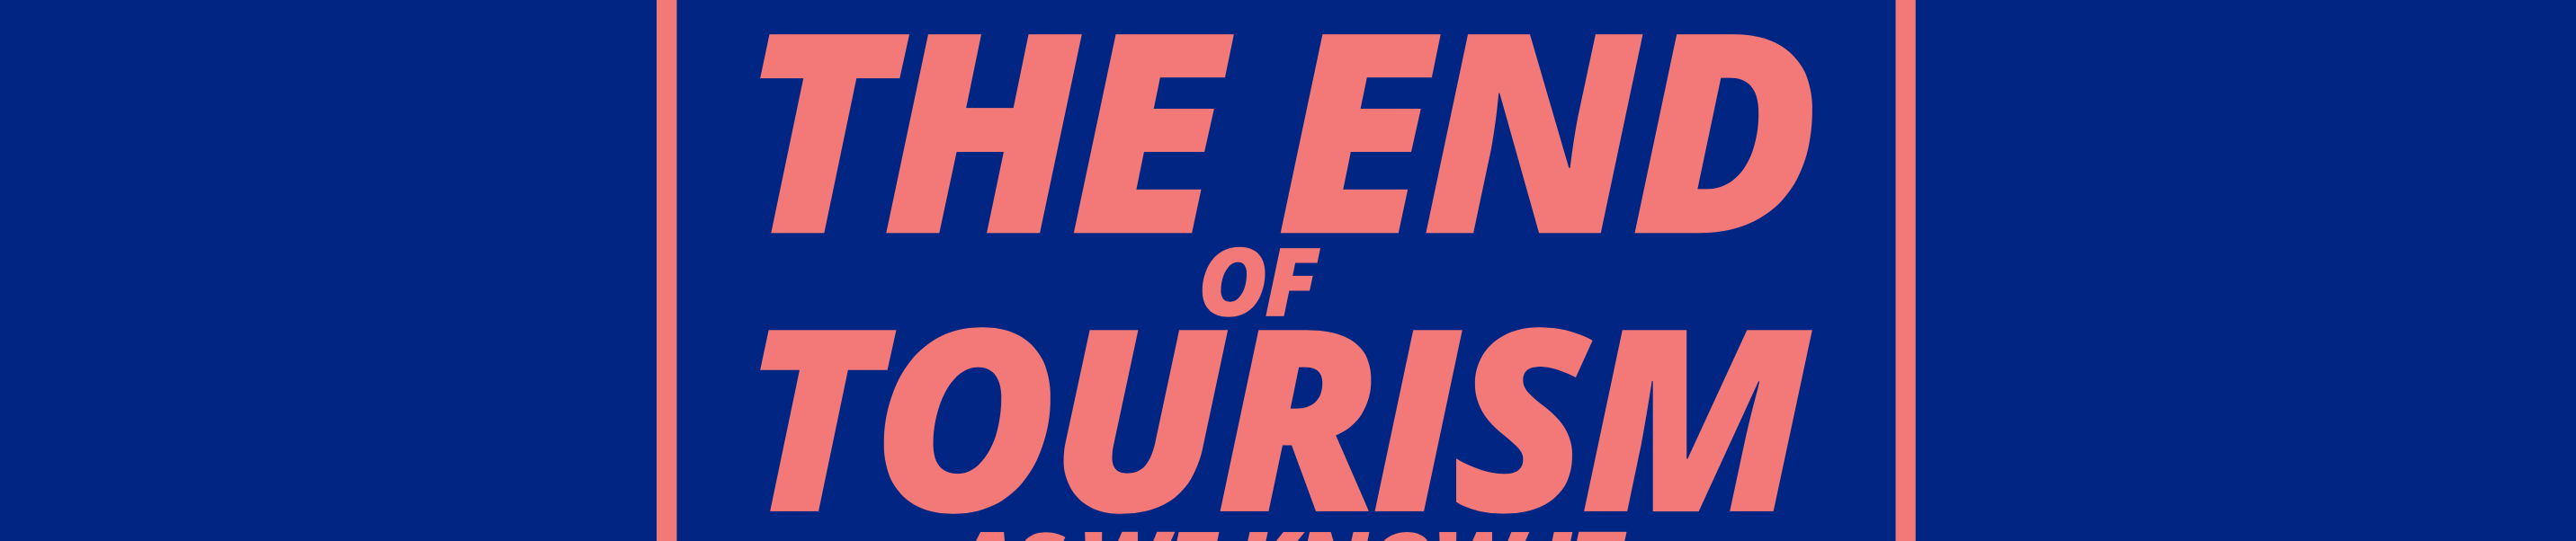 The end of tourism